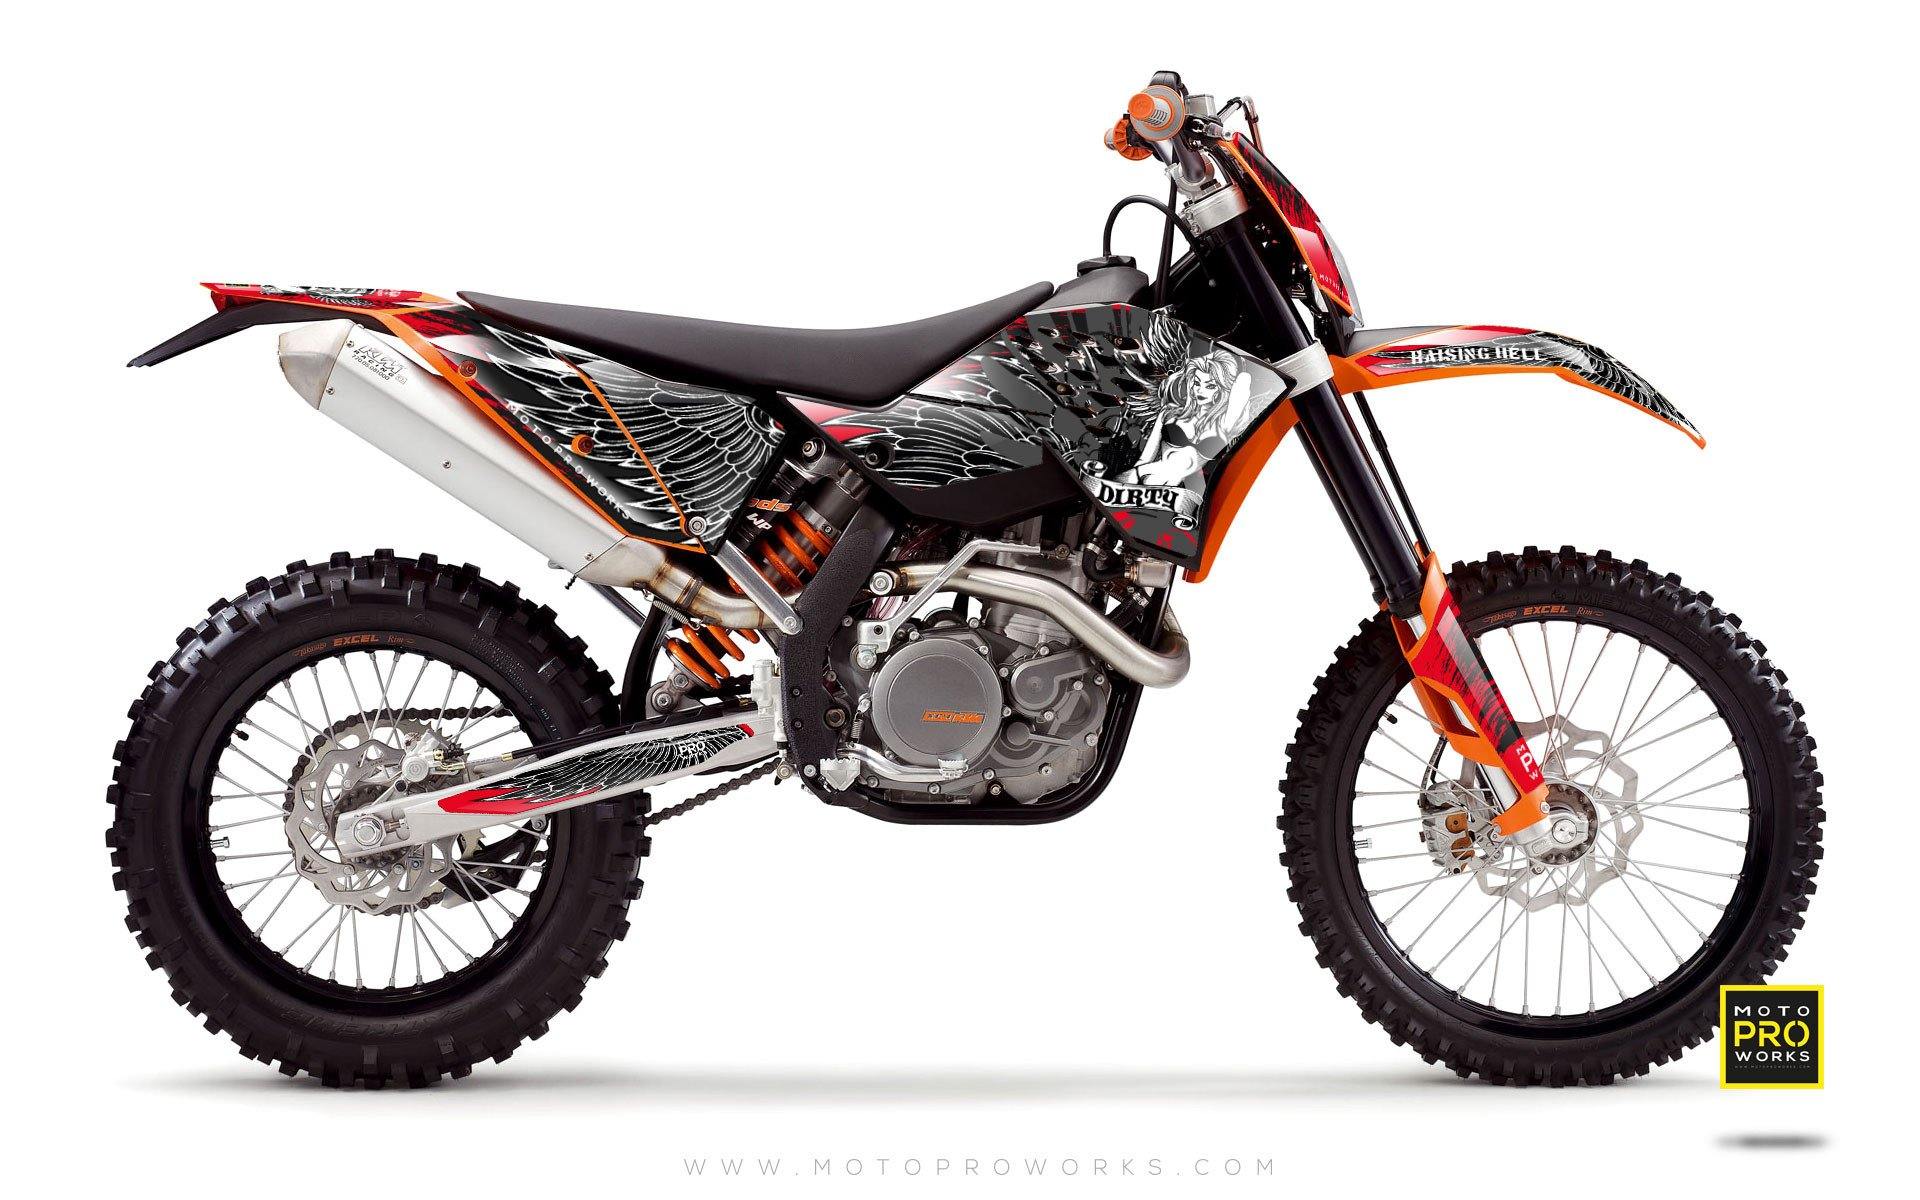 KTM GRAPHIC KIT - "Dirty Angel" (red) - MotoProWorks | Decals and Bike Graphic kit